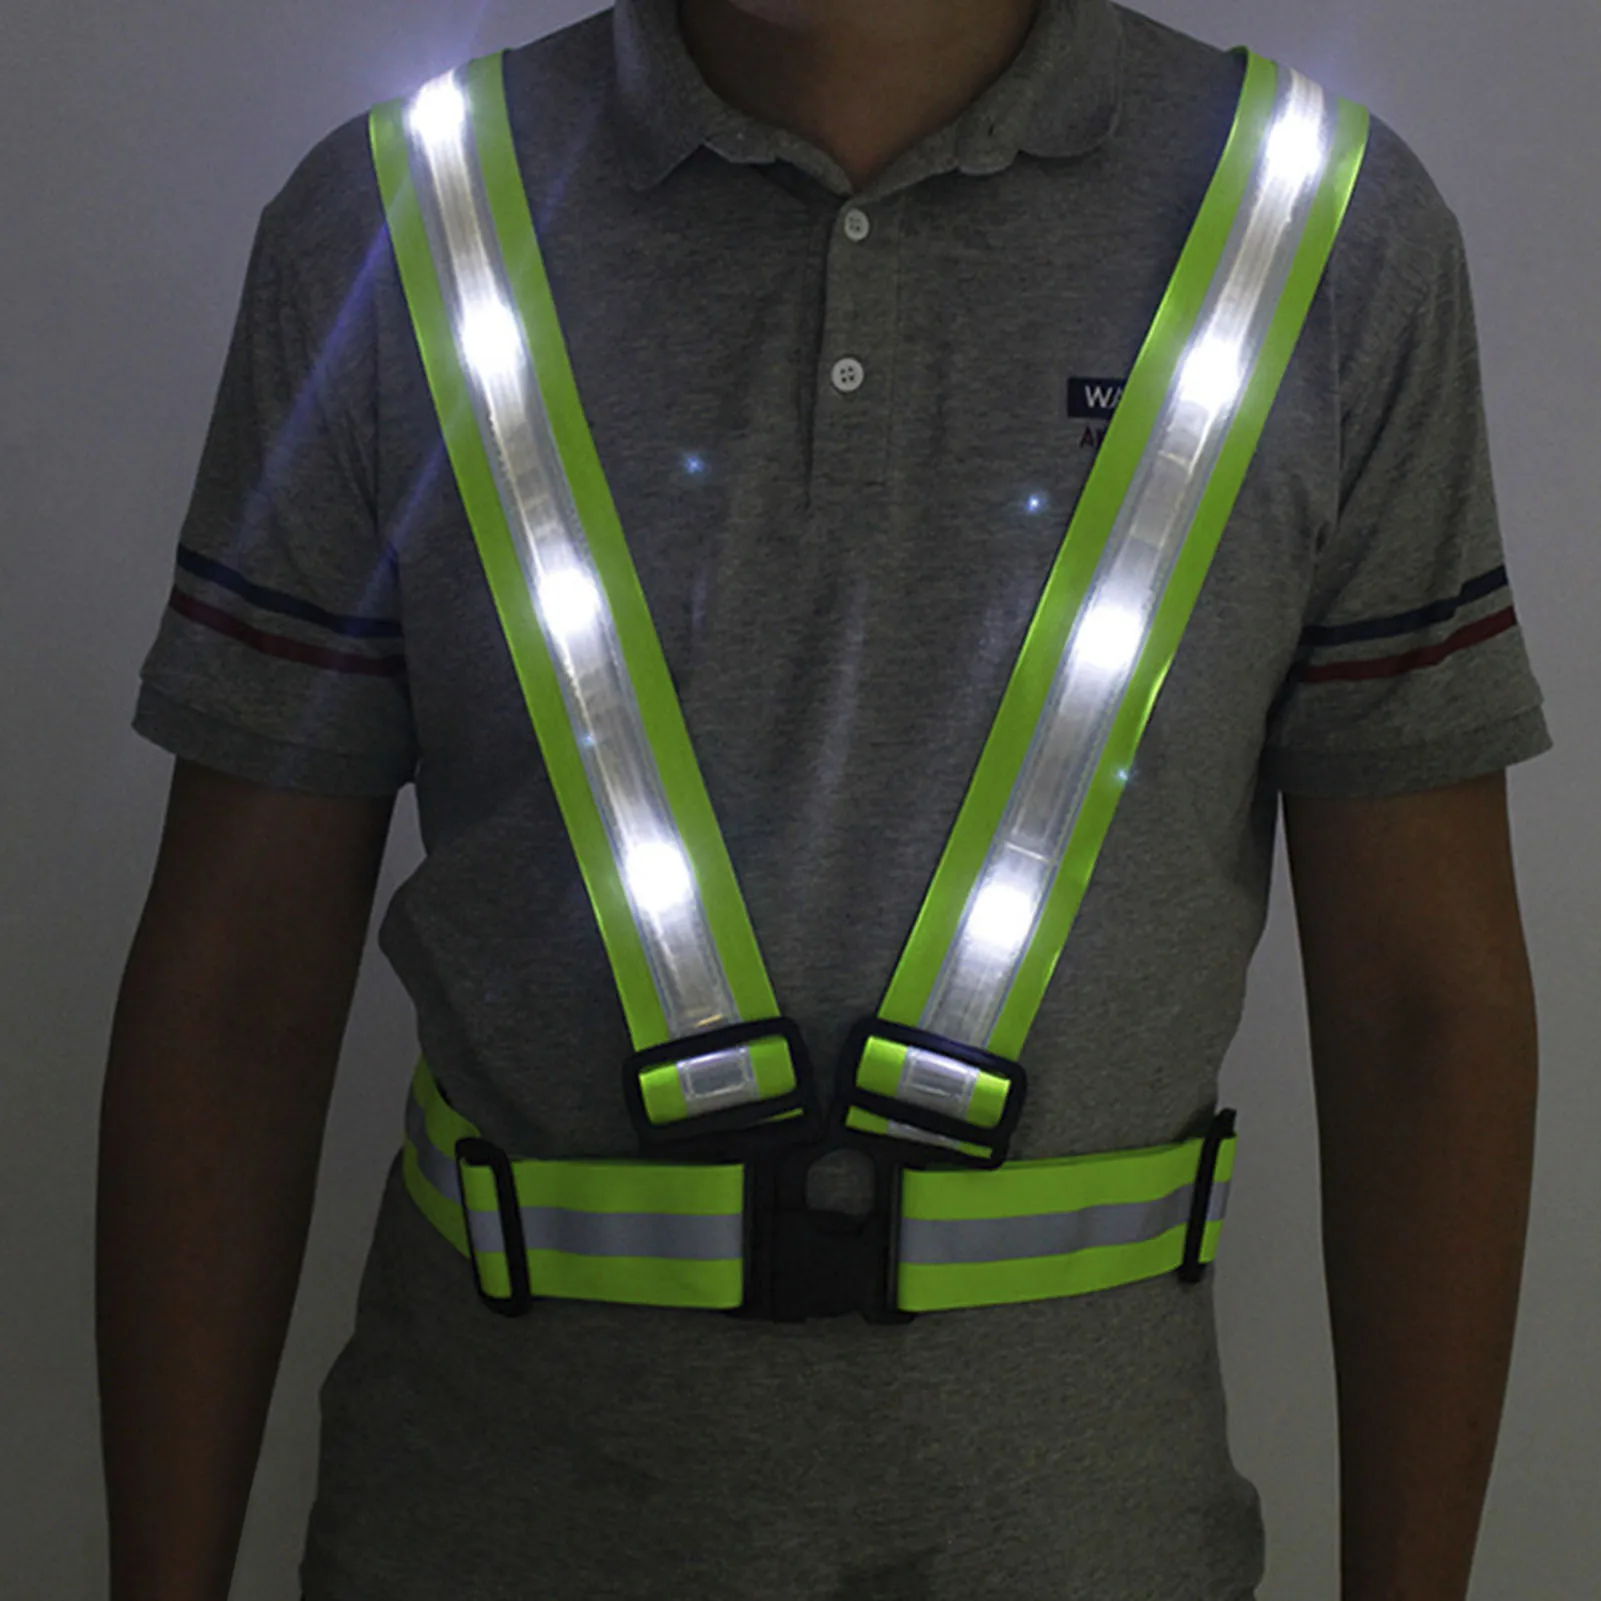 

LED Reflective Vest 3 Light Modes Cycling Vests High Visibility Outdoor Running Cycling Reflective Adjustable Safety Vests